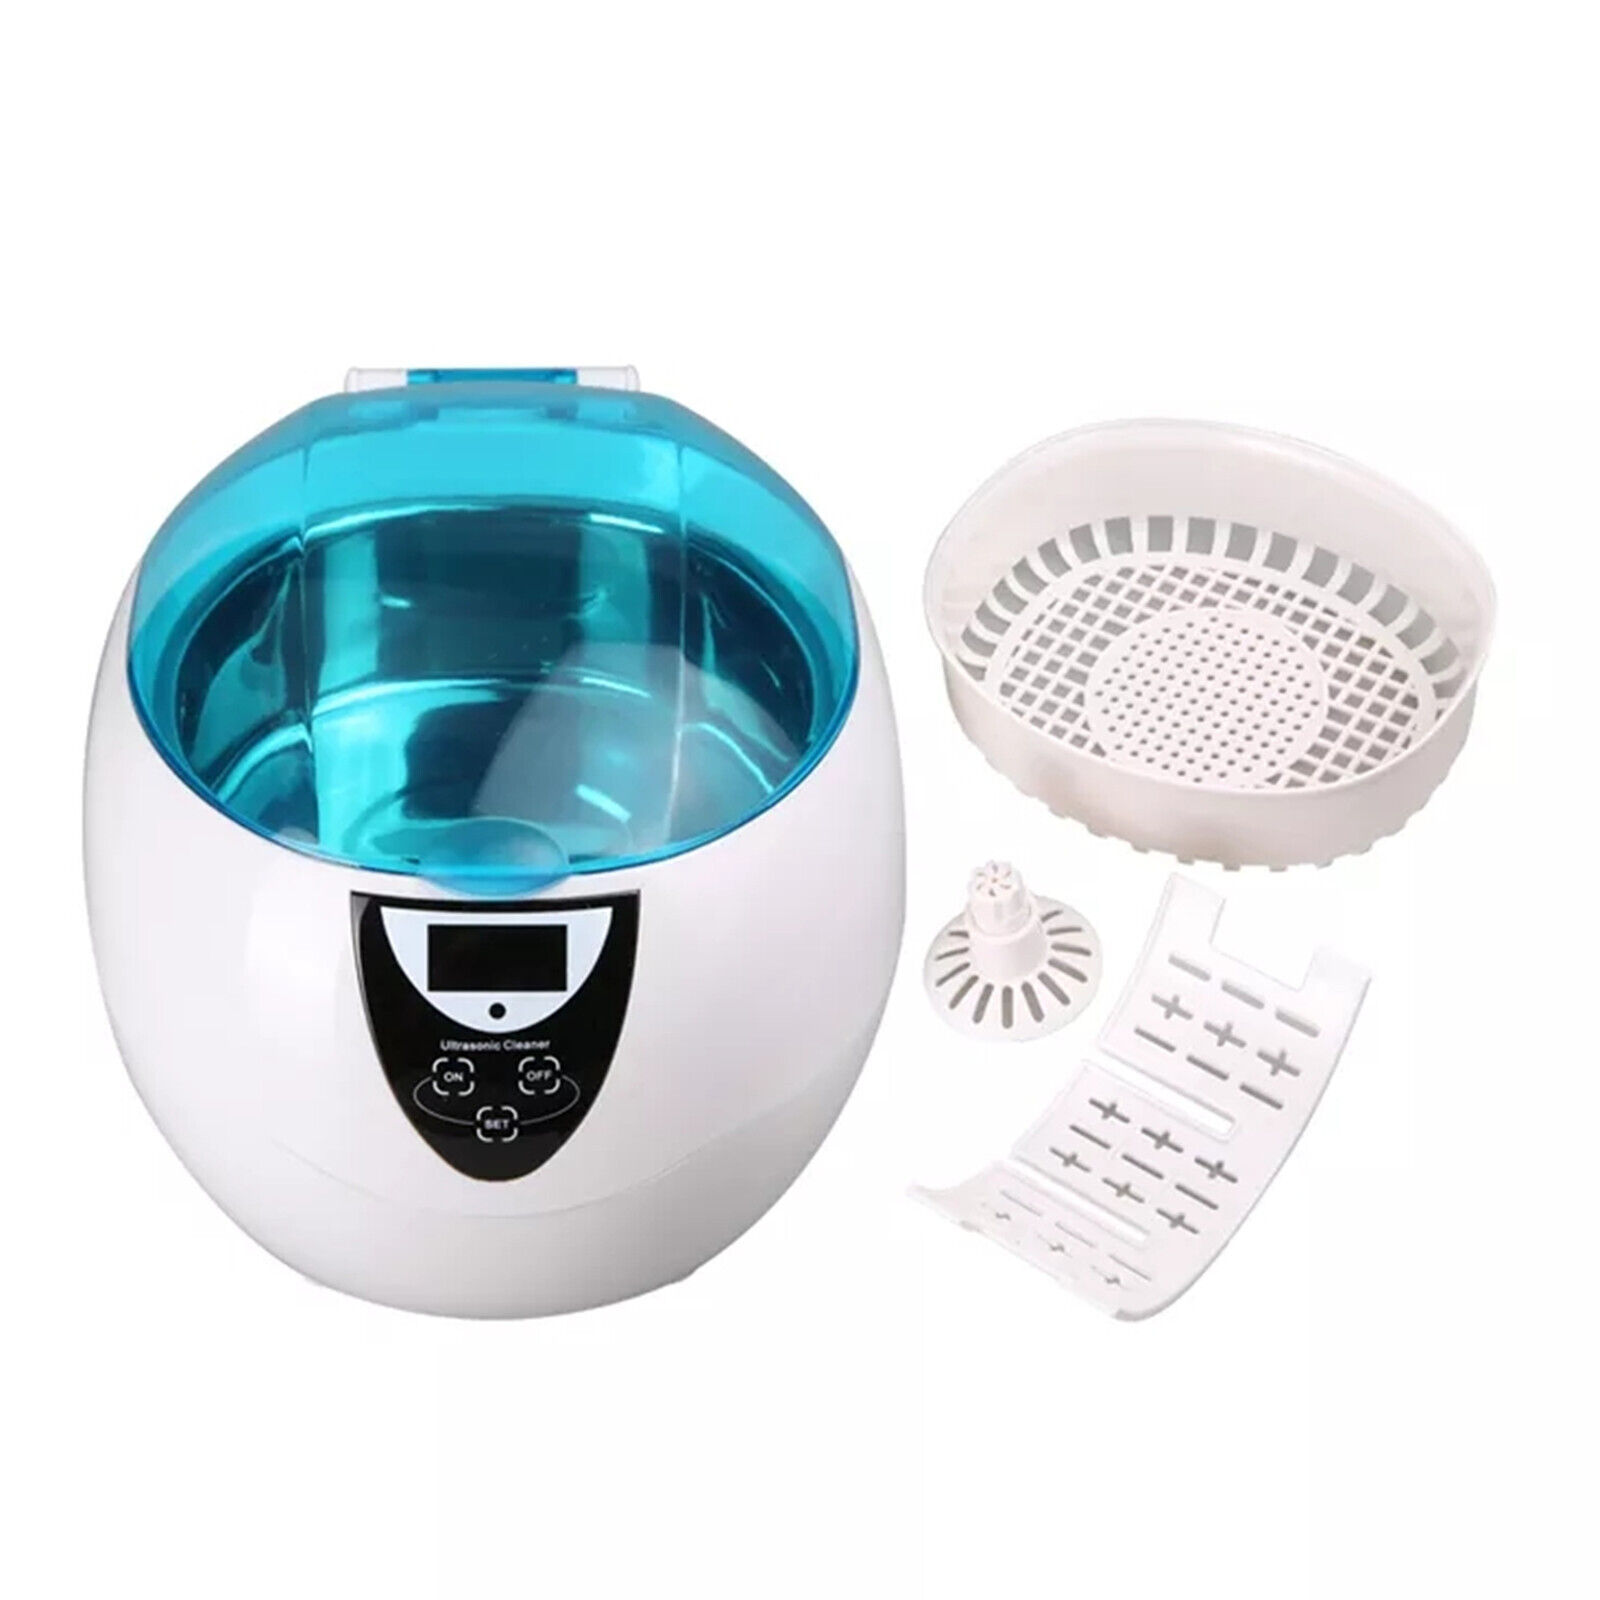 750ml Digital Ultrasonic Cleaner with LED Screen for Jewelry Watch Denture 5200A